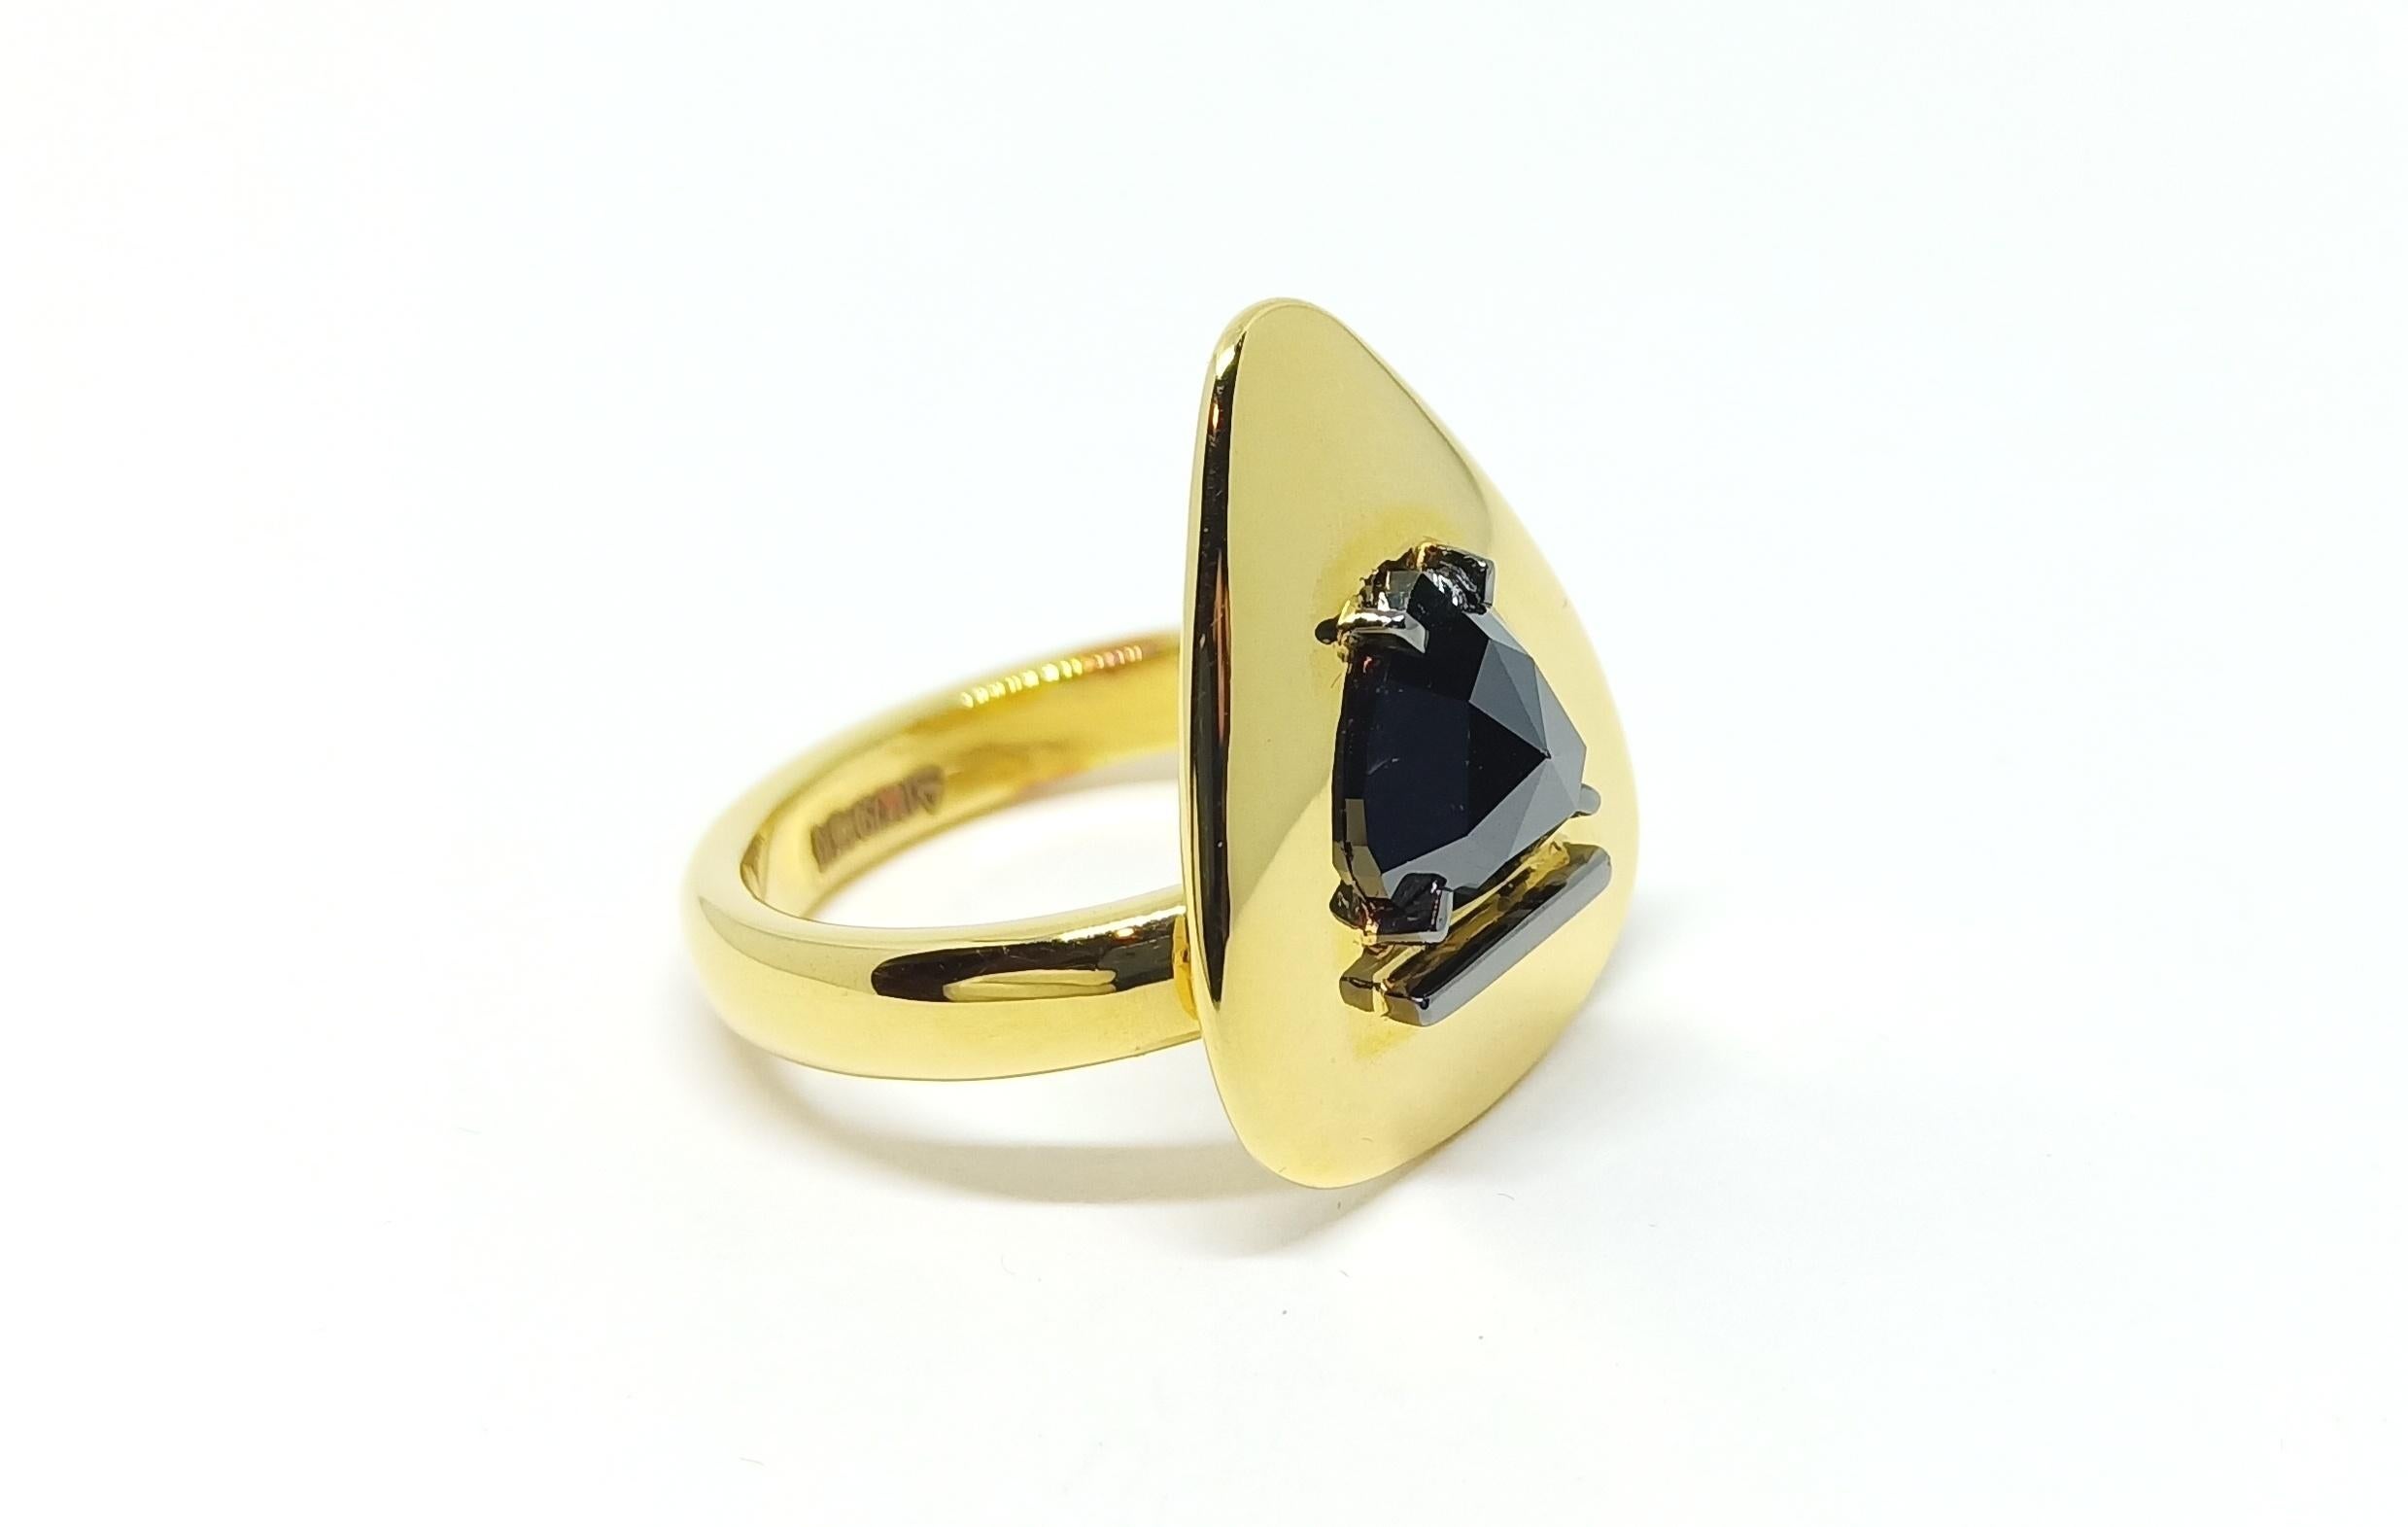 An elegant 18 Karat Yellow Gold One of a Kind Ring featuring a solitaire Black Rose cut Diamond weighing 1.33 carats. Rohit loves attention to detail in every aspect of his creations. The ring features a number of unique design elements, in the